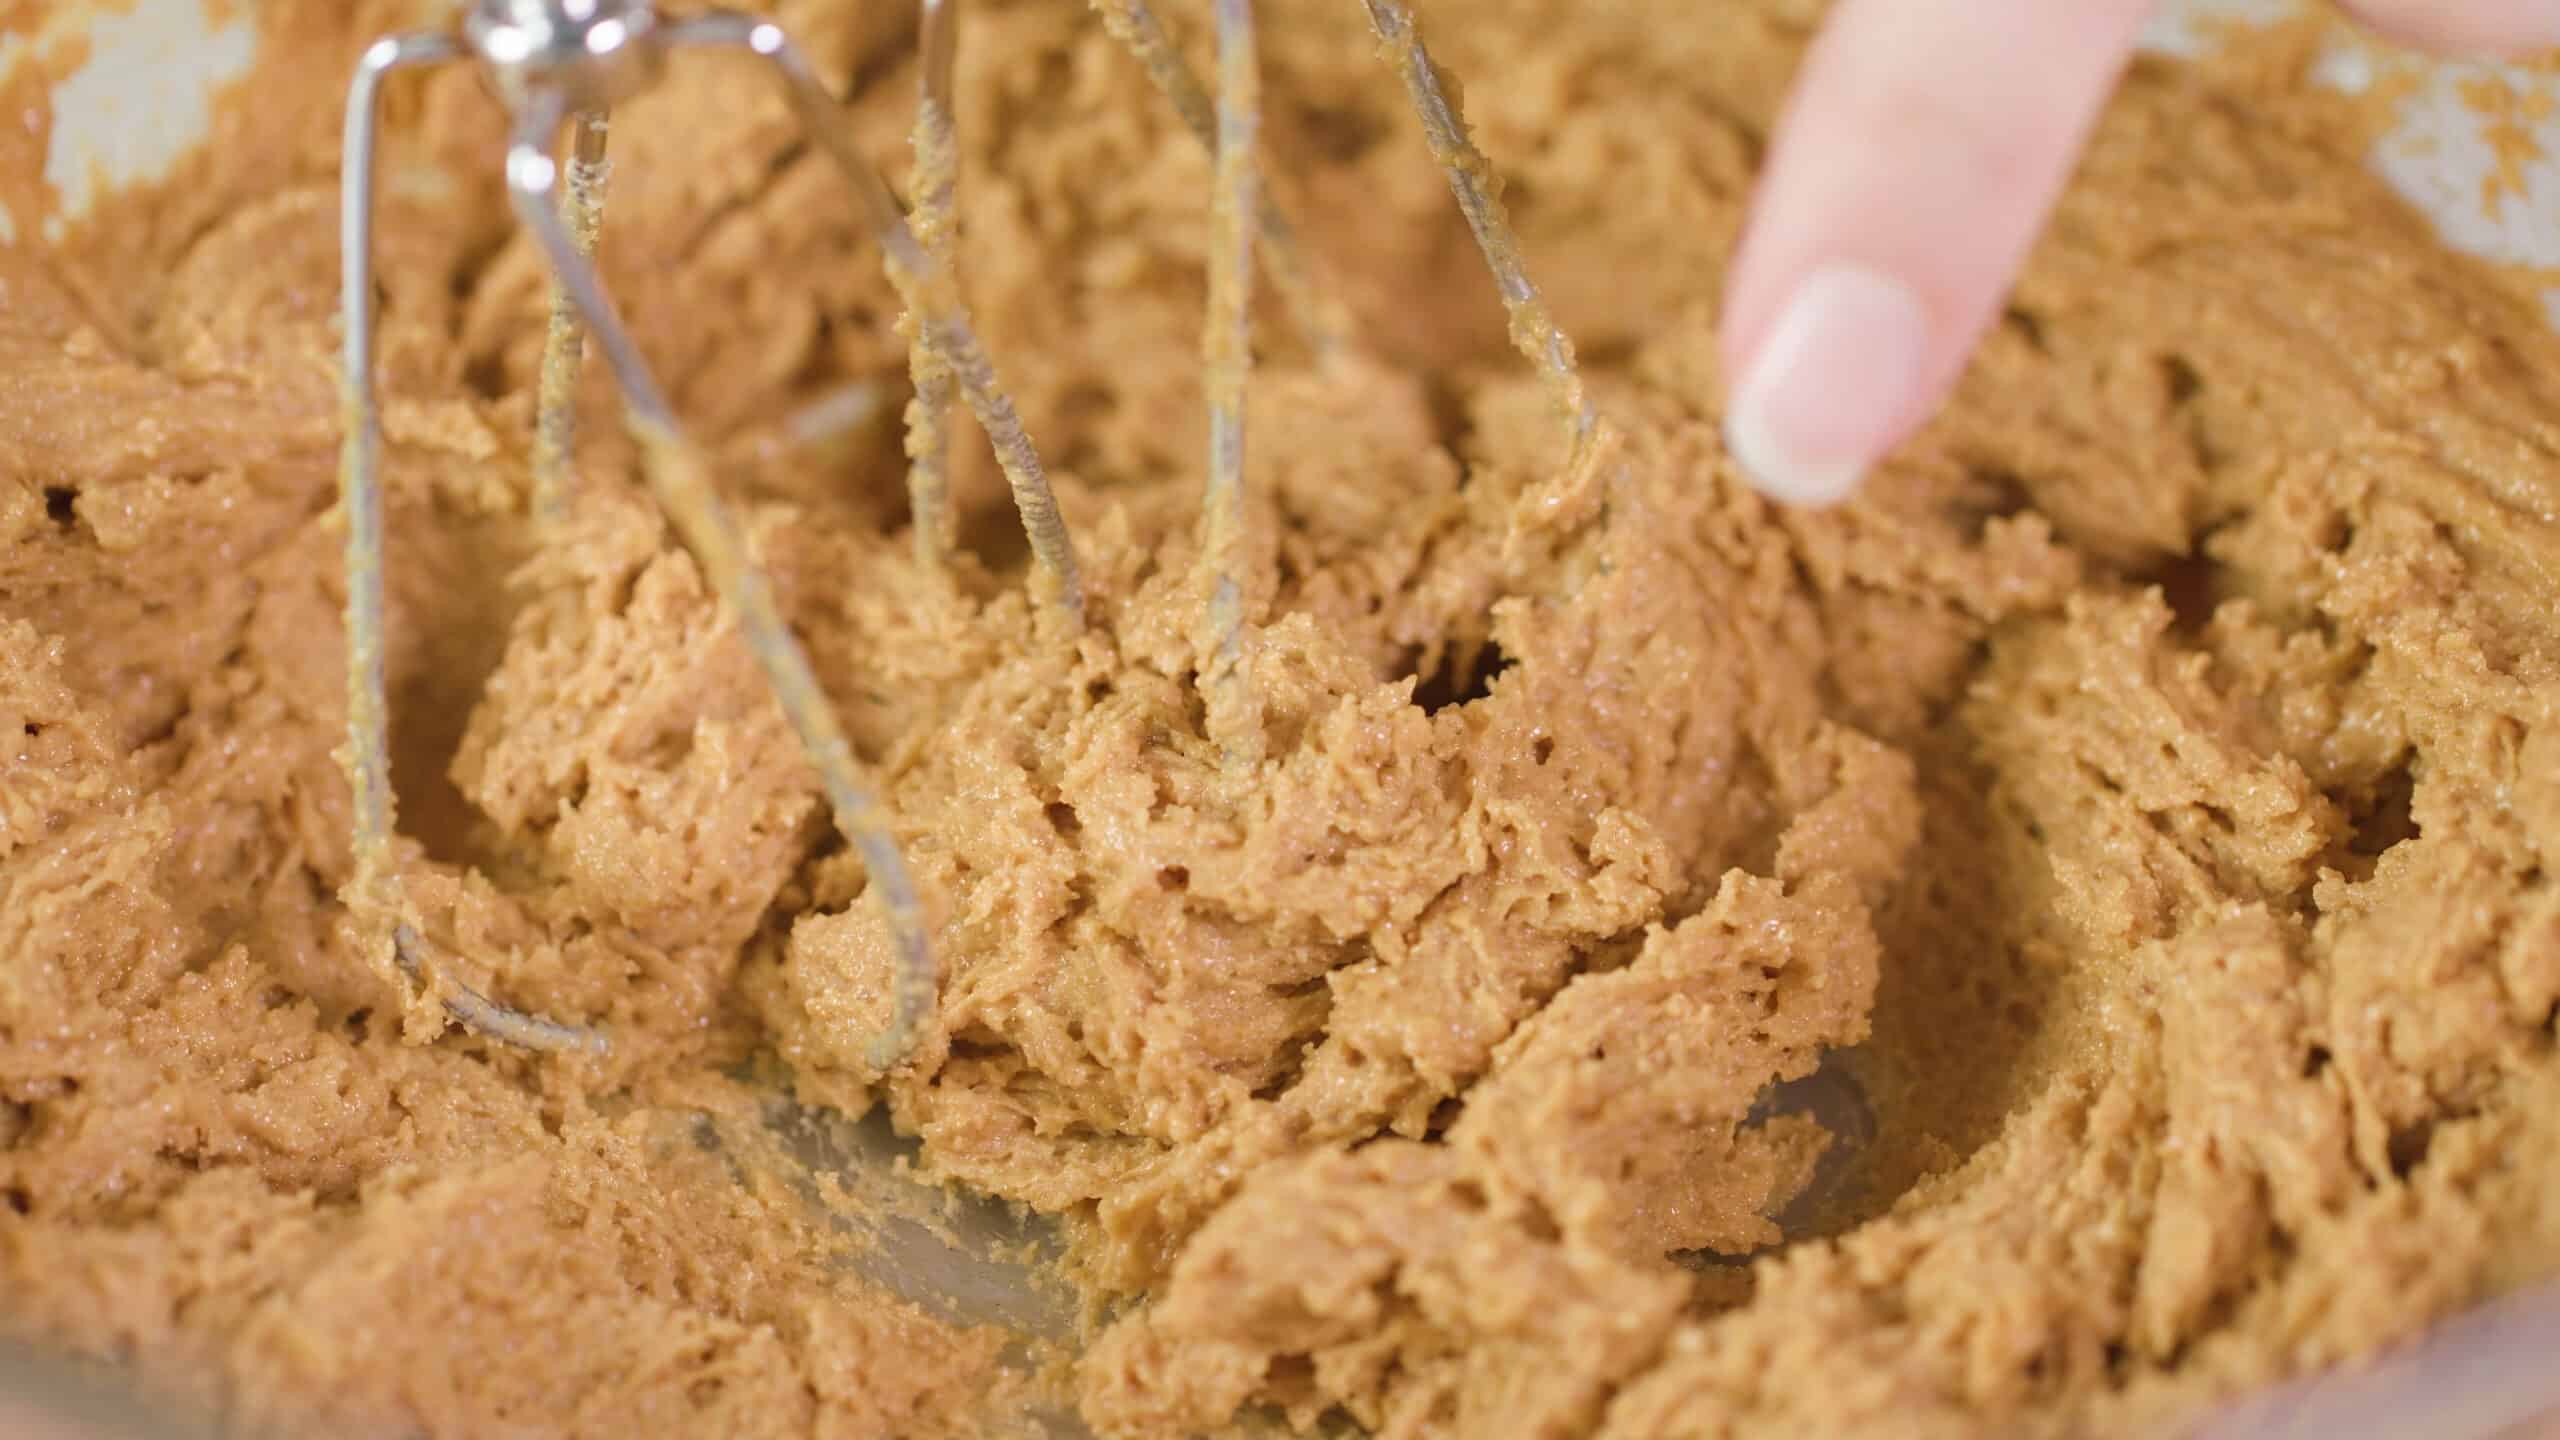 Close-up view of peanut butter cookie dough to show texture after beating ingredients together with hand mixer.